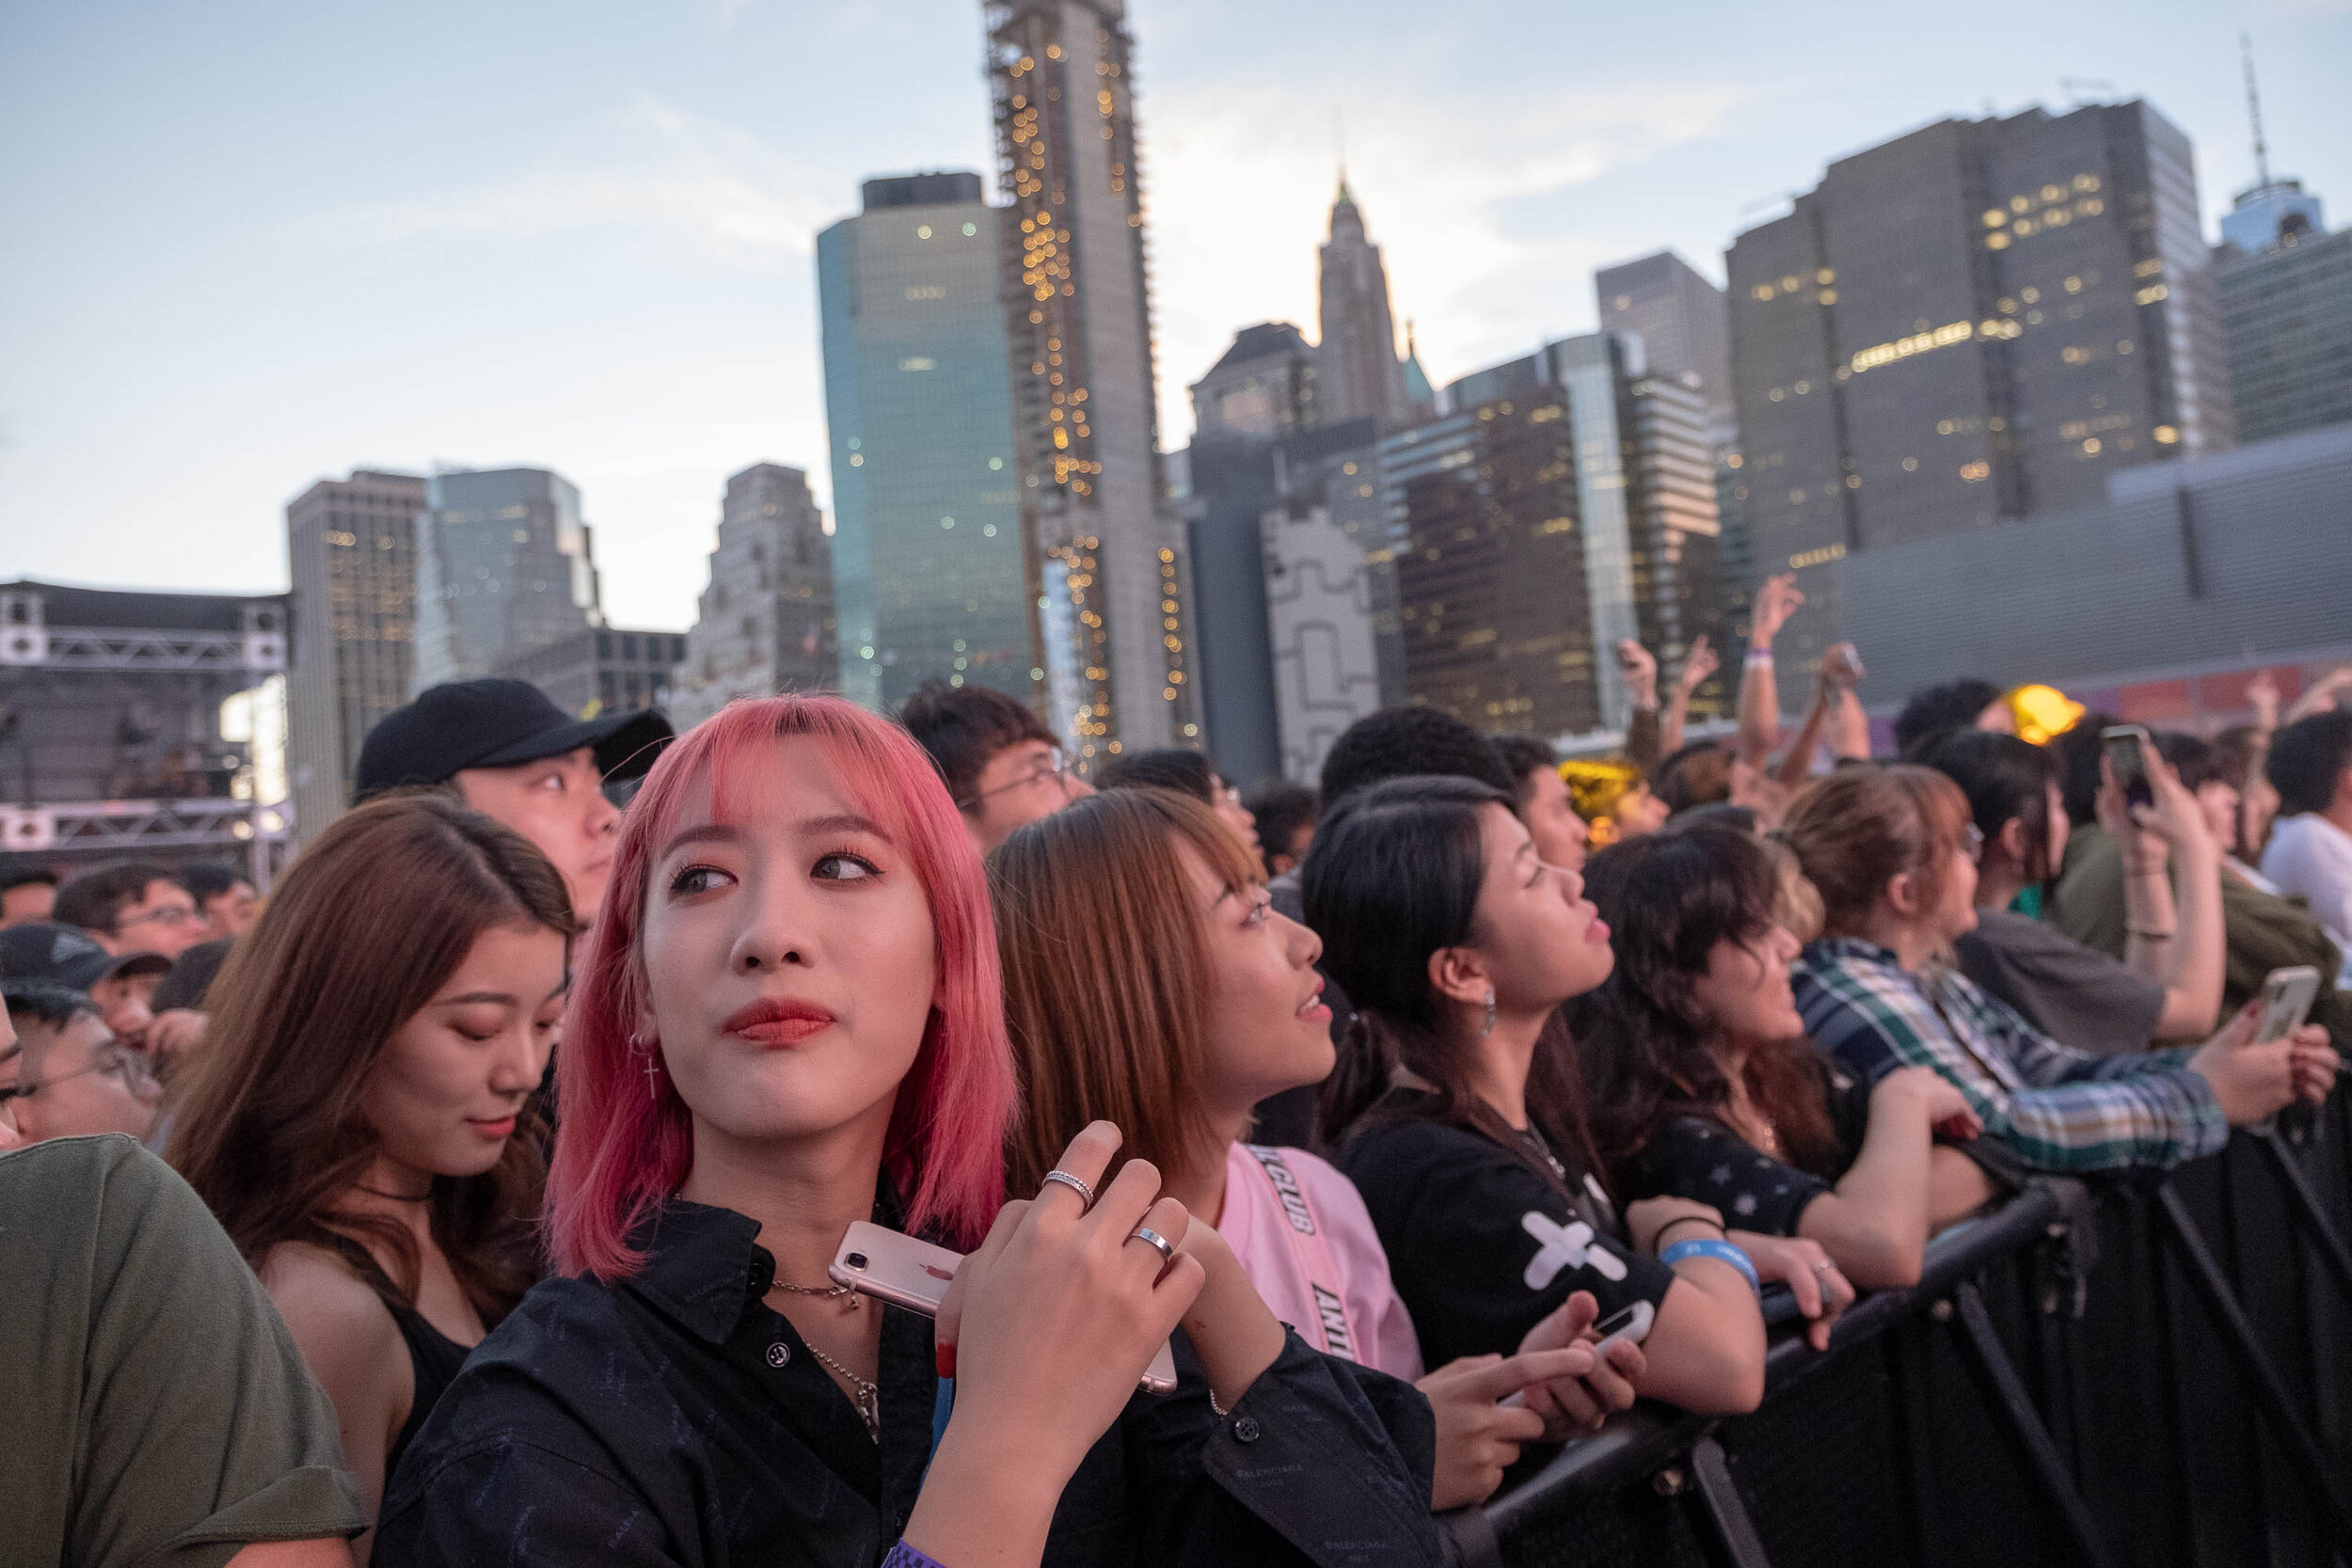  88rising's sold-out show at Pier 17, a swanky rooftop at the southern tip of Manhattan, served as a coming out party for the company in 2018.   